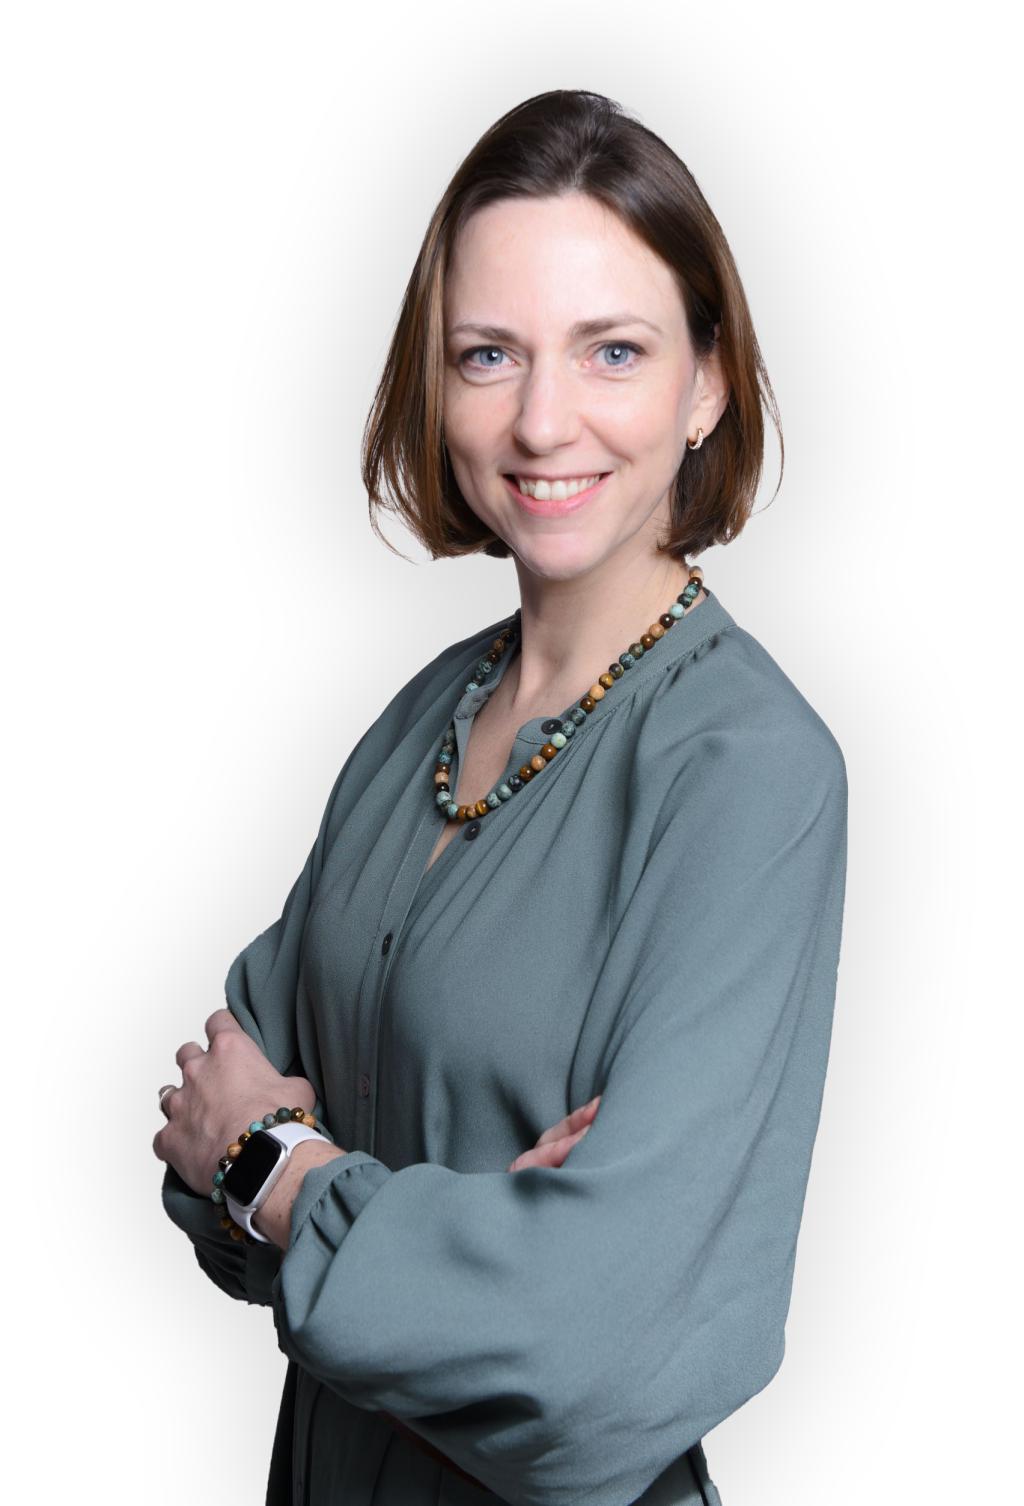 Cindy Rubbens becomes head of HR at Blacklane